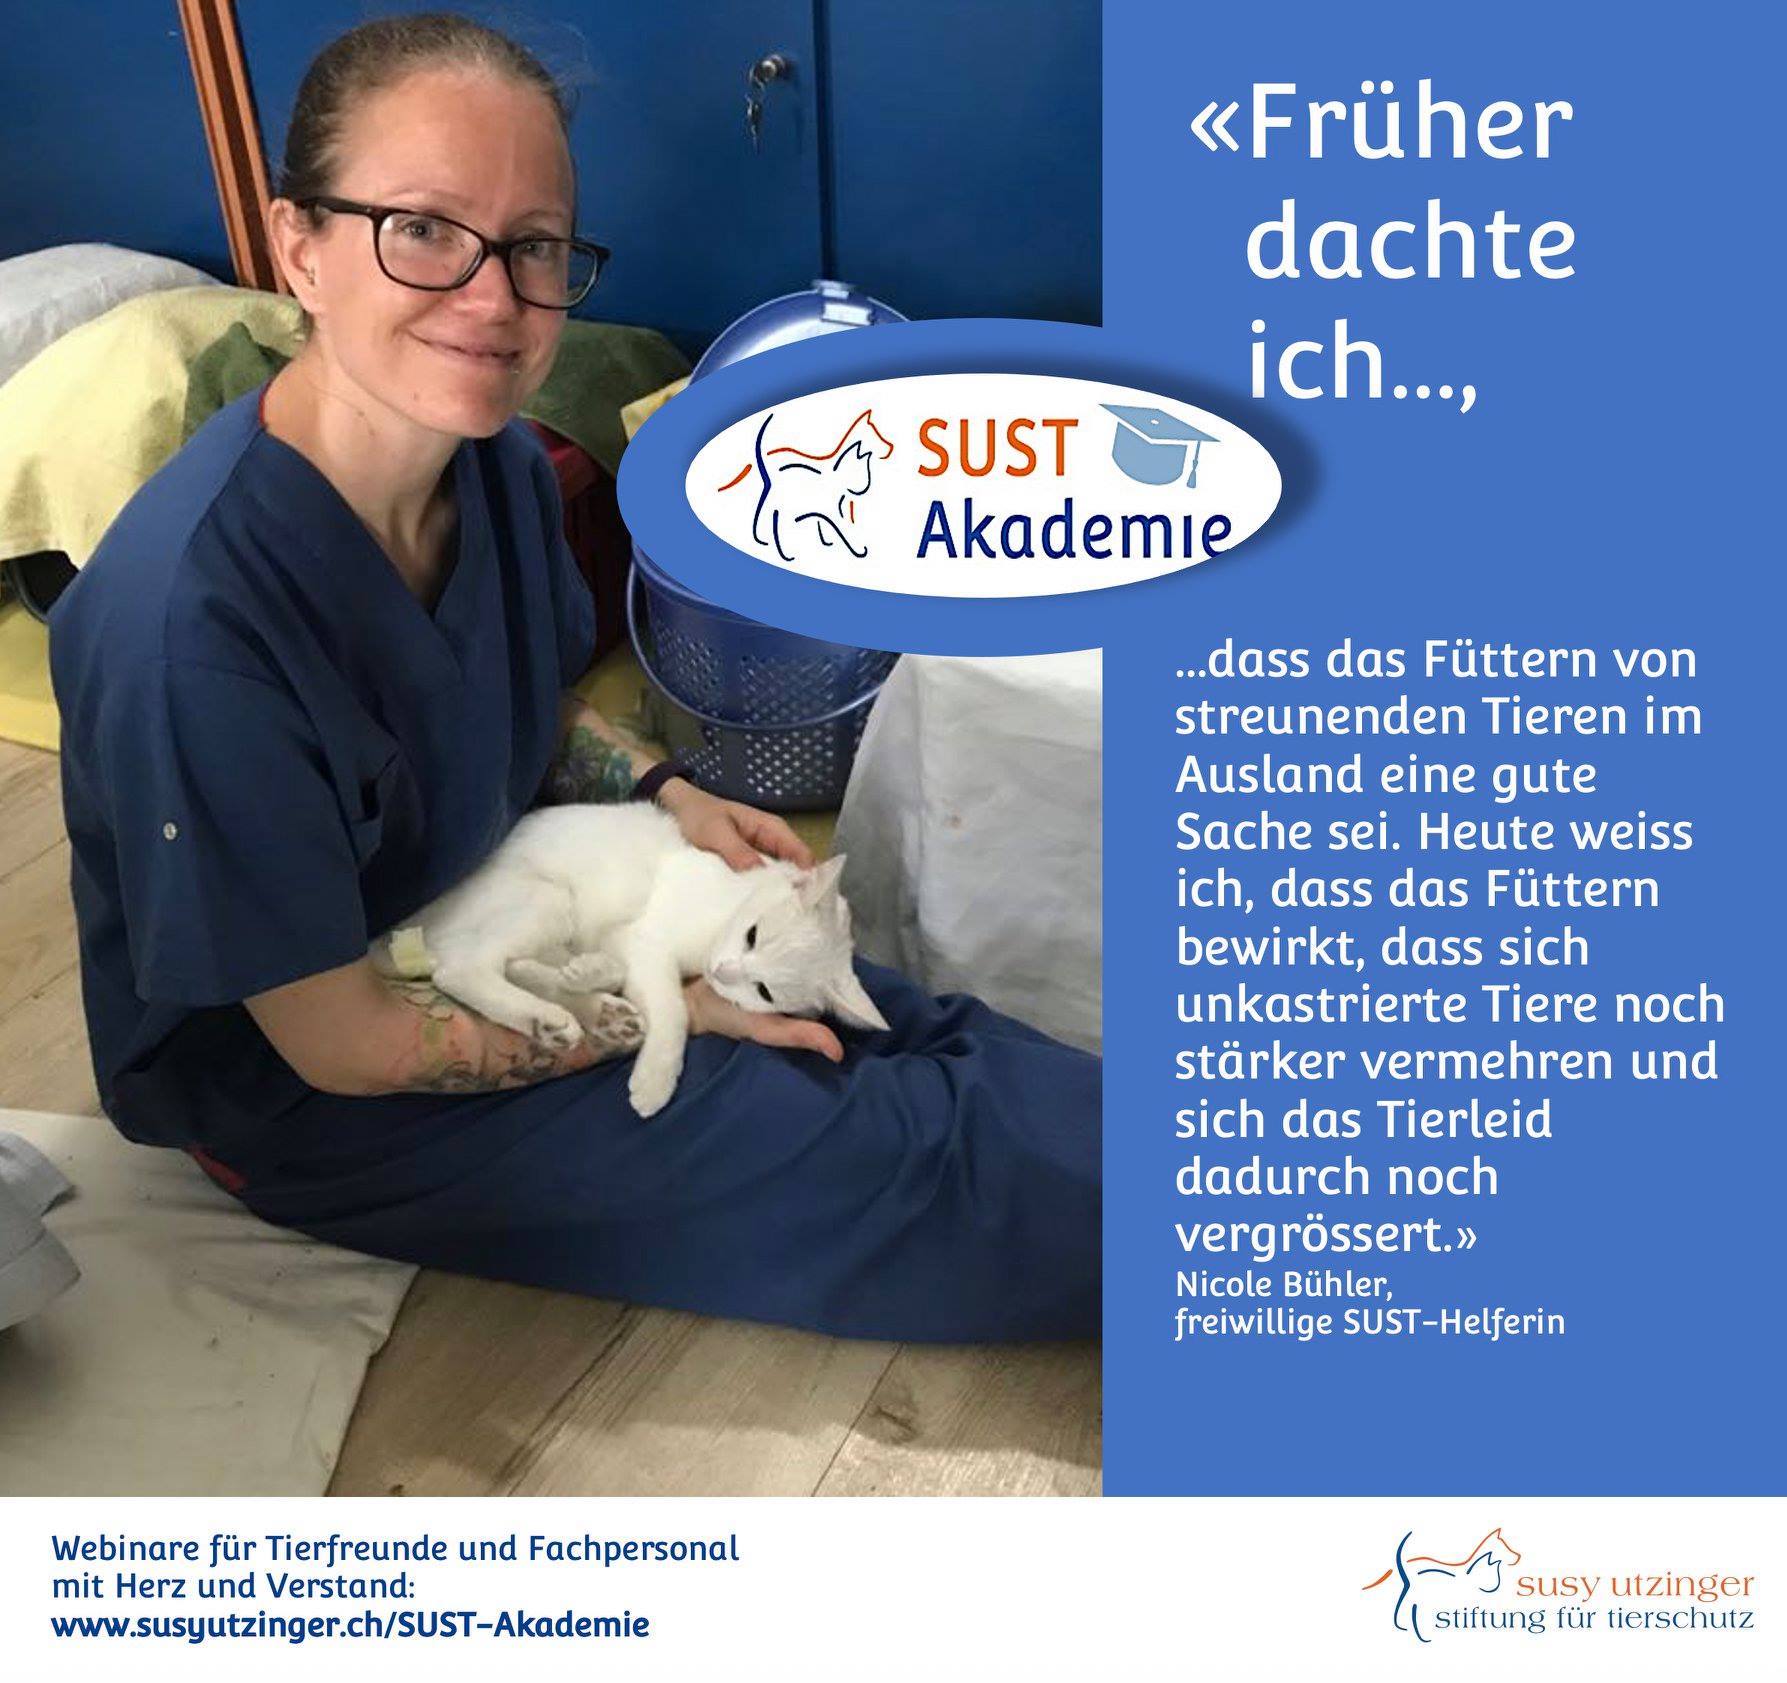 Acquire your animal welfare expertise at the SUST Academy (German only)